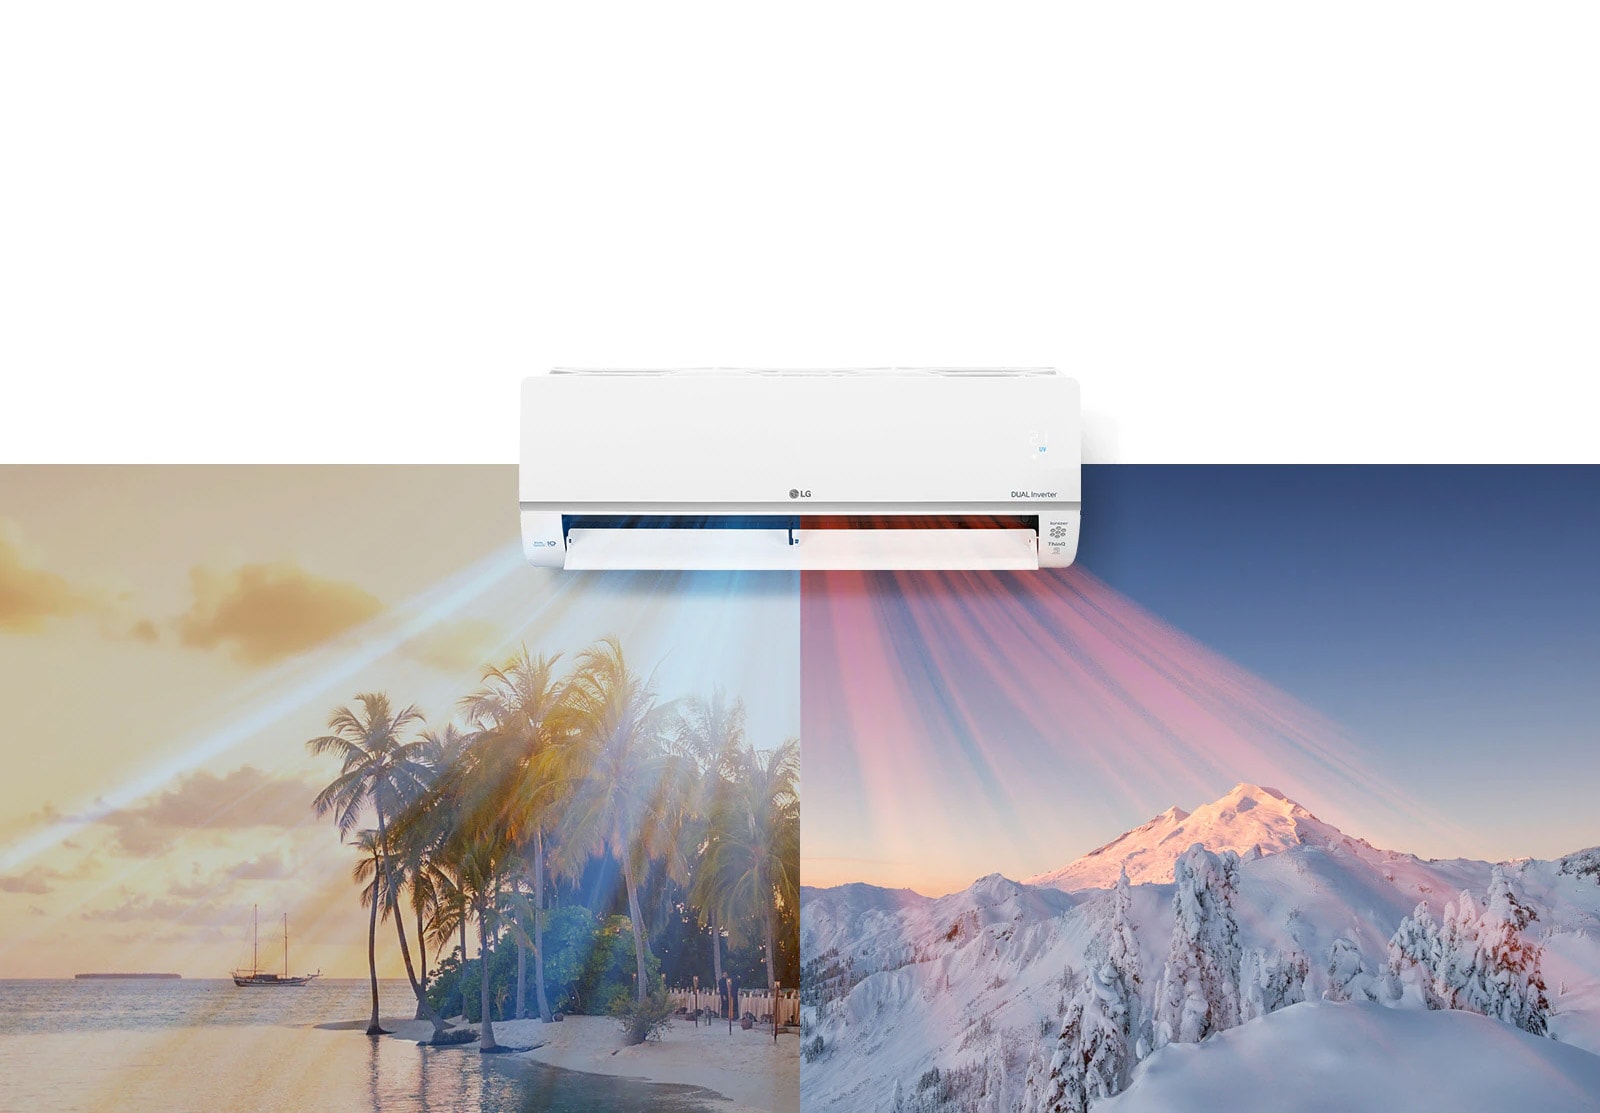 An LG air conditioner posted in the image in the upper center position. Below are two images, one image shows a hot beach and the other a snowy mountain. The air conditioner blows cool blue air into the image of the beach and warm red air into the image of the snowy landscape.